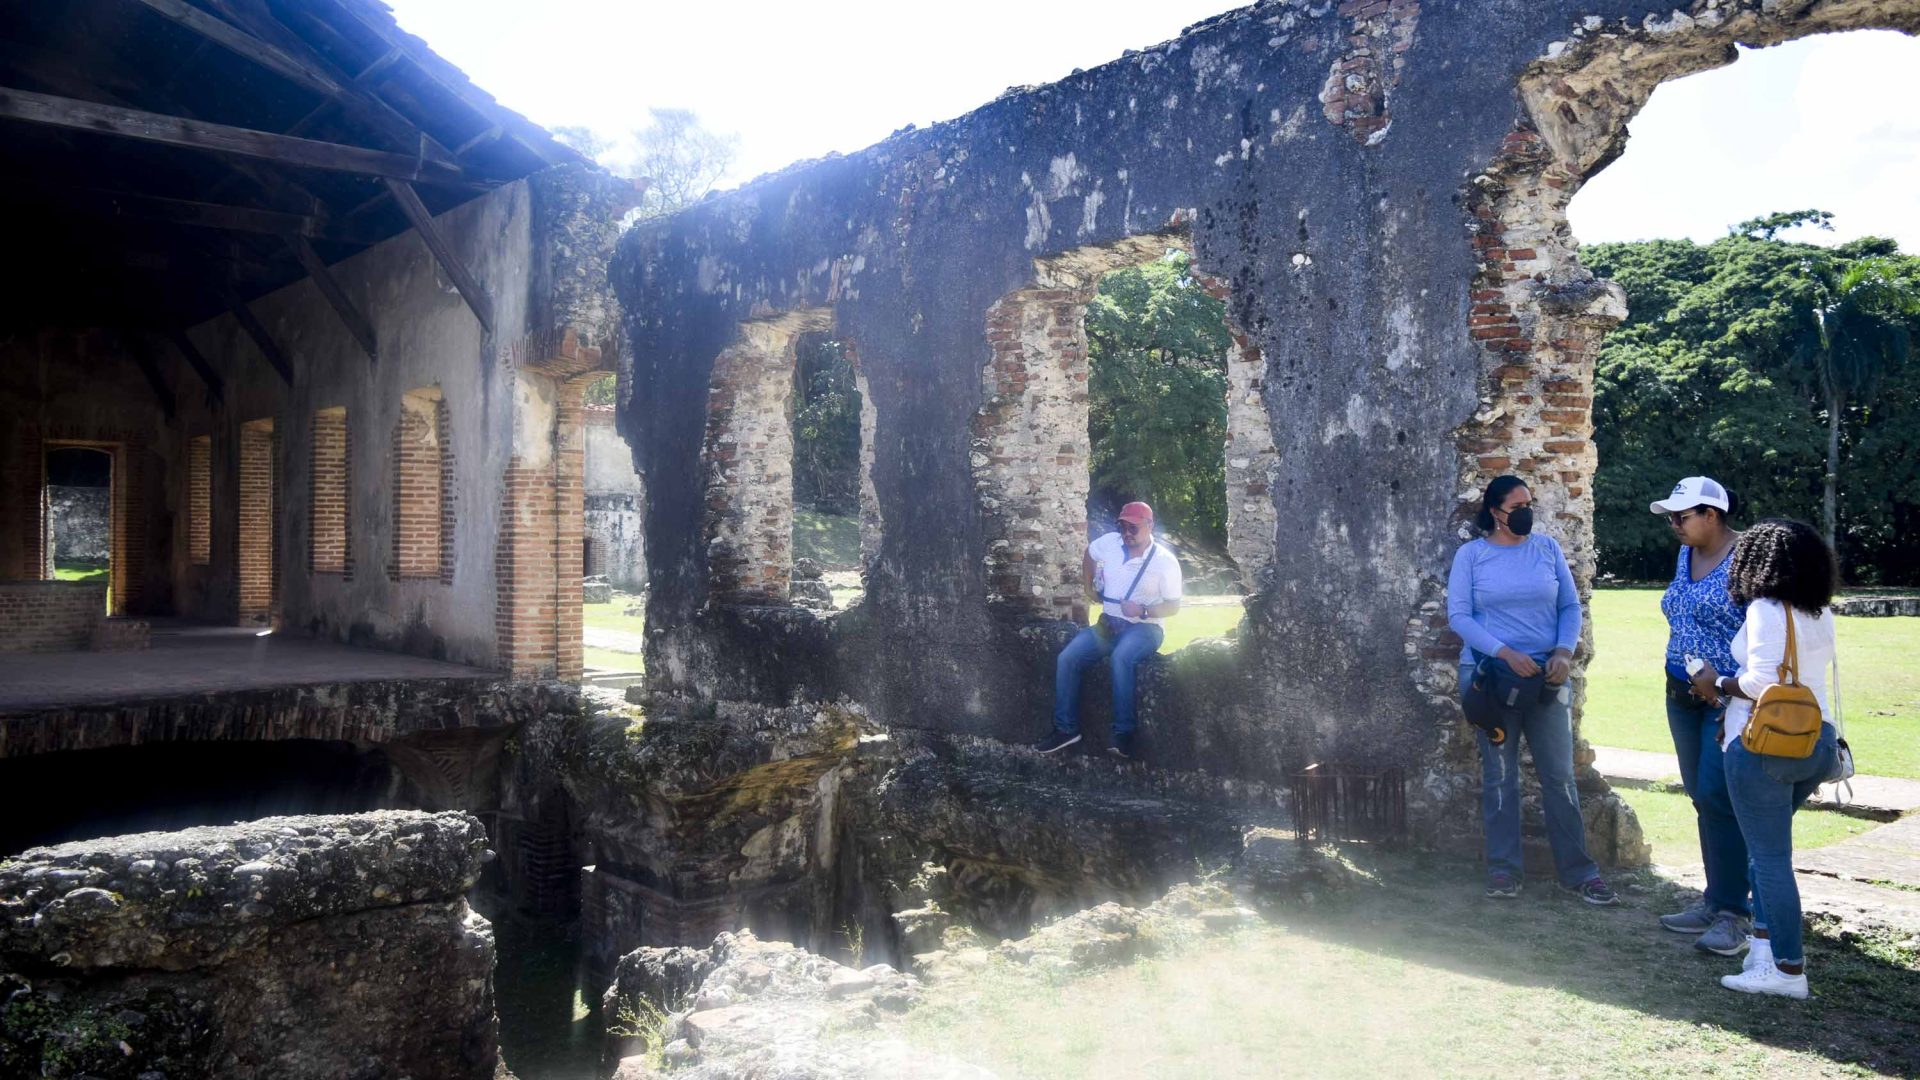 People sit around the ruins of a building